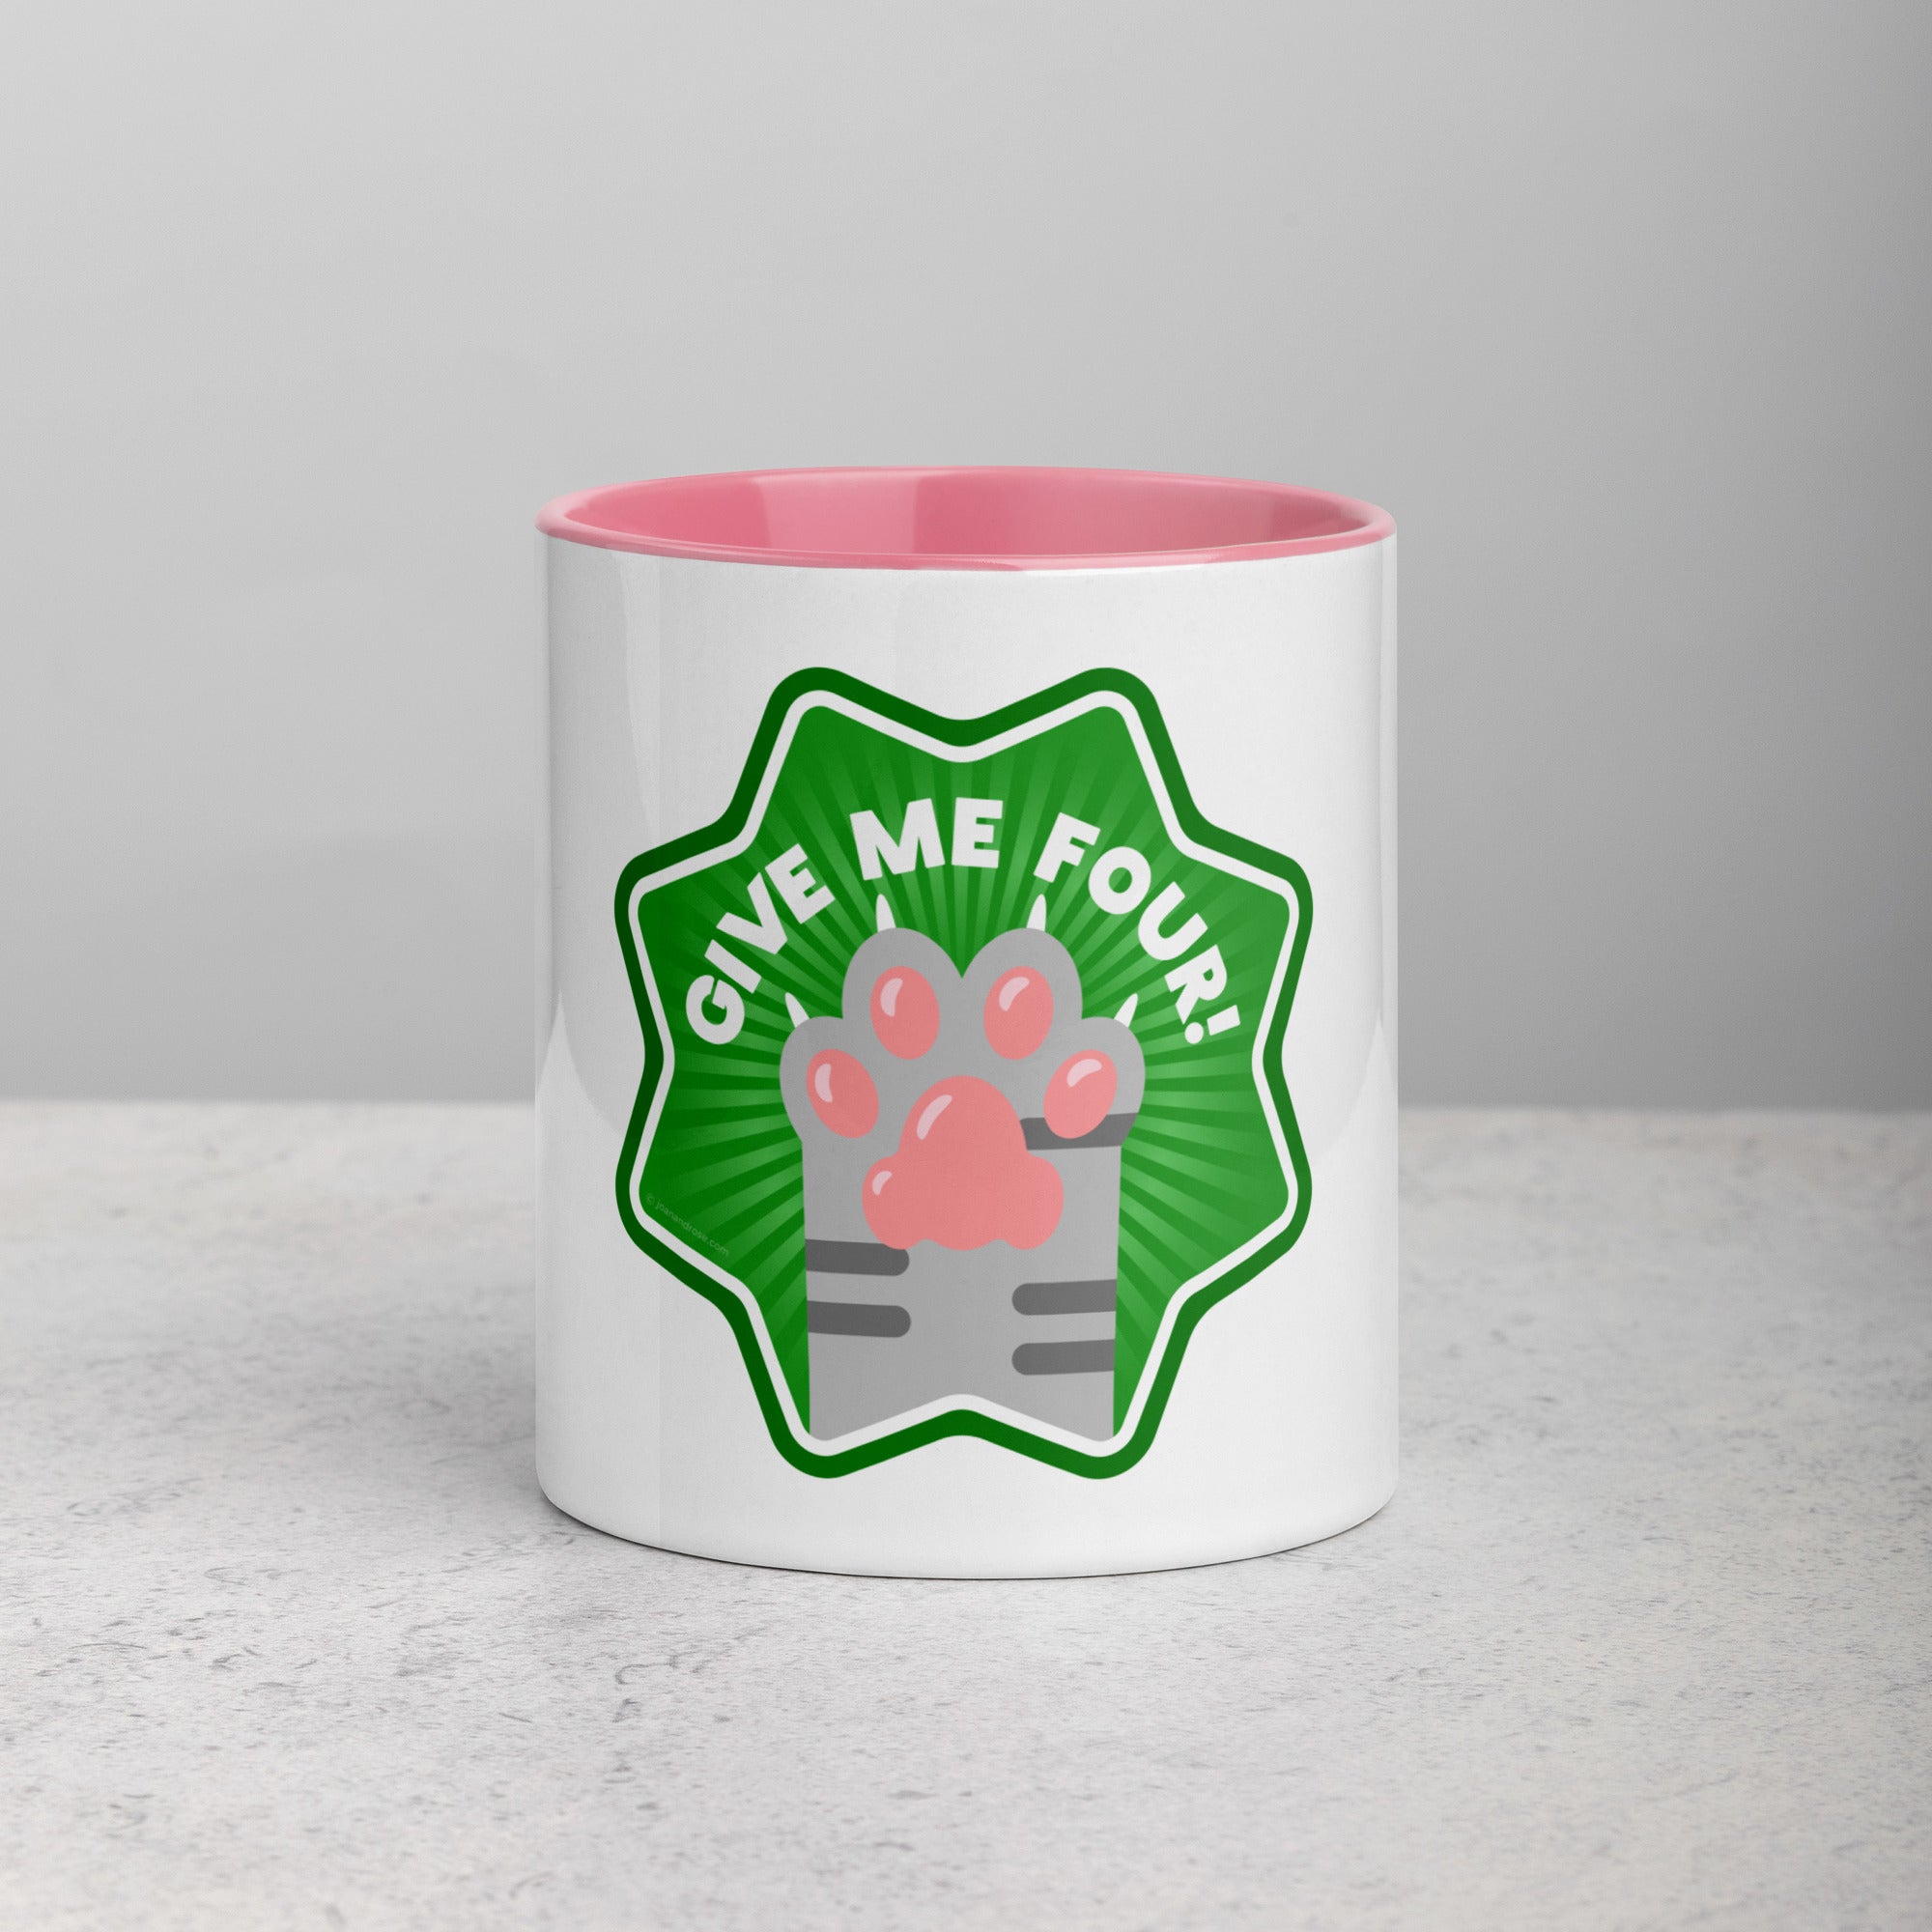 front facing image of a white mug with pink interior and handle. Mug has image of a grey tabby cats paw on a green 8 sided star with the text 'give me four' 